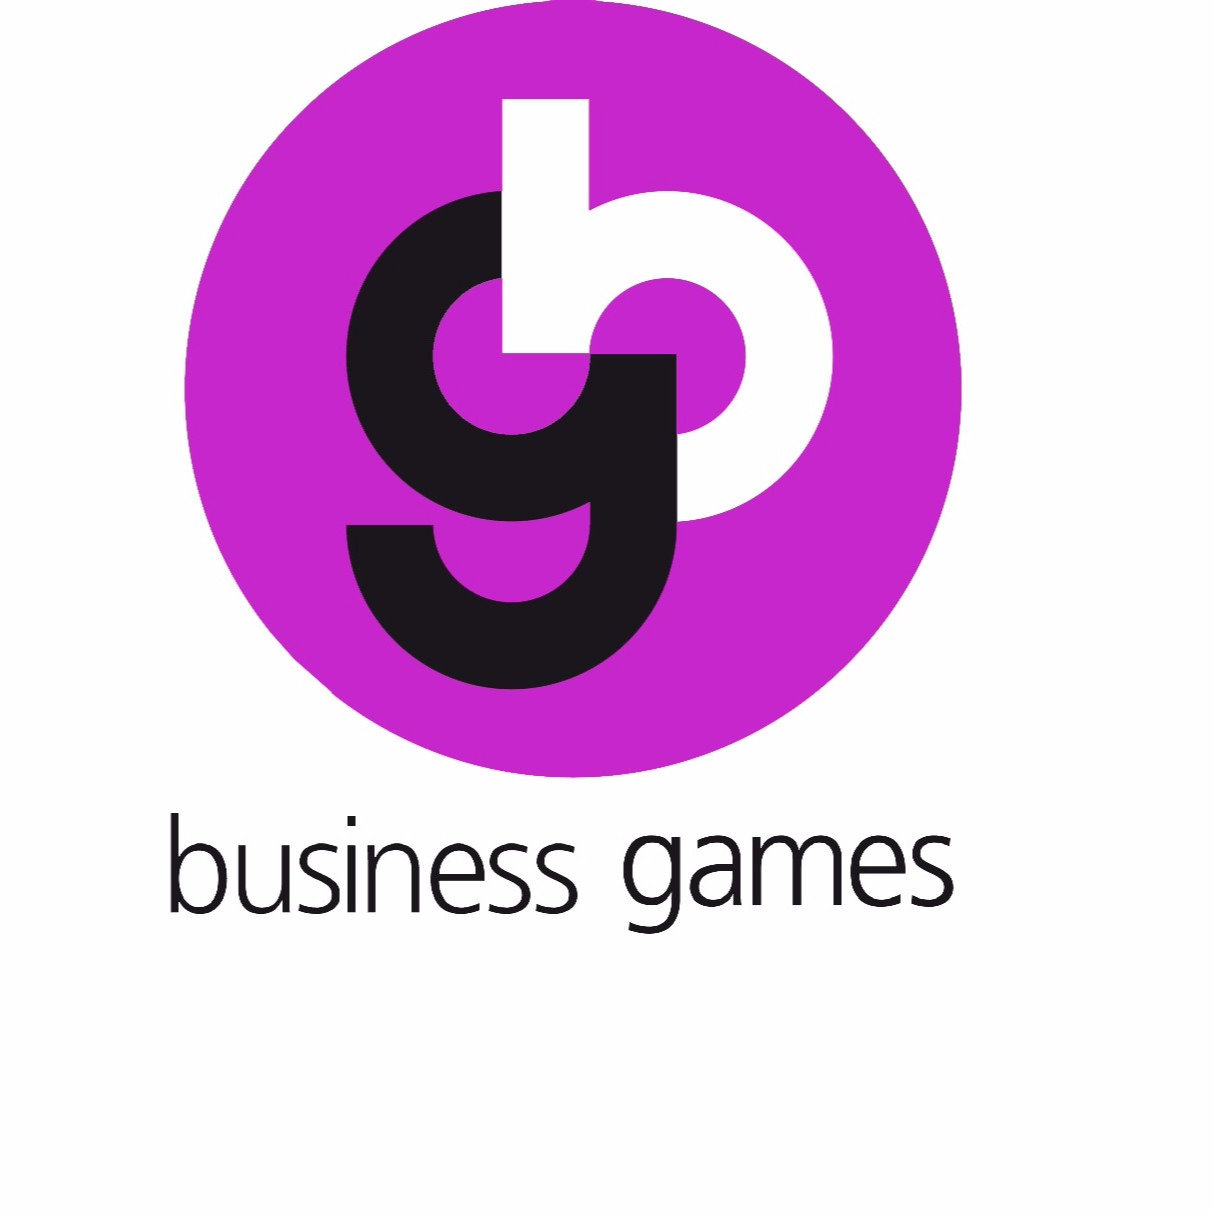  business games